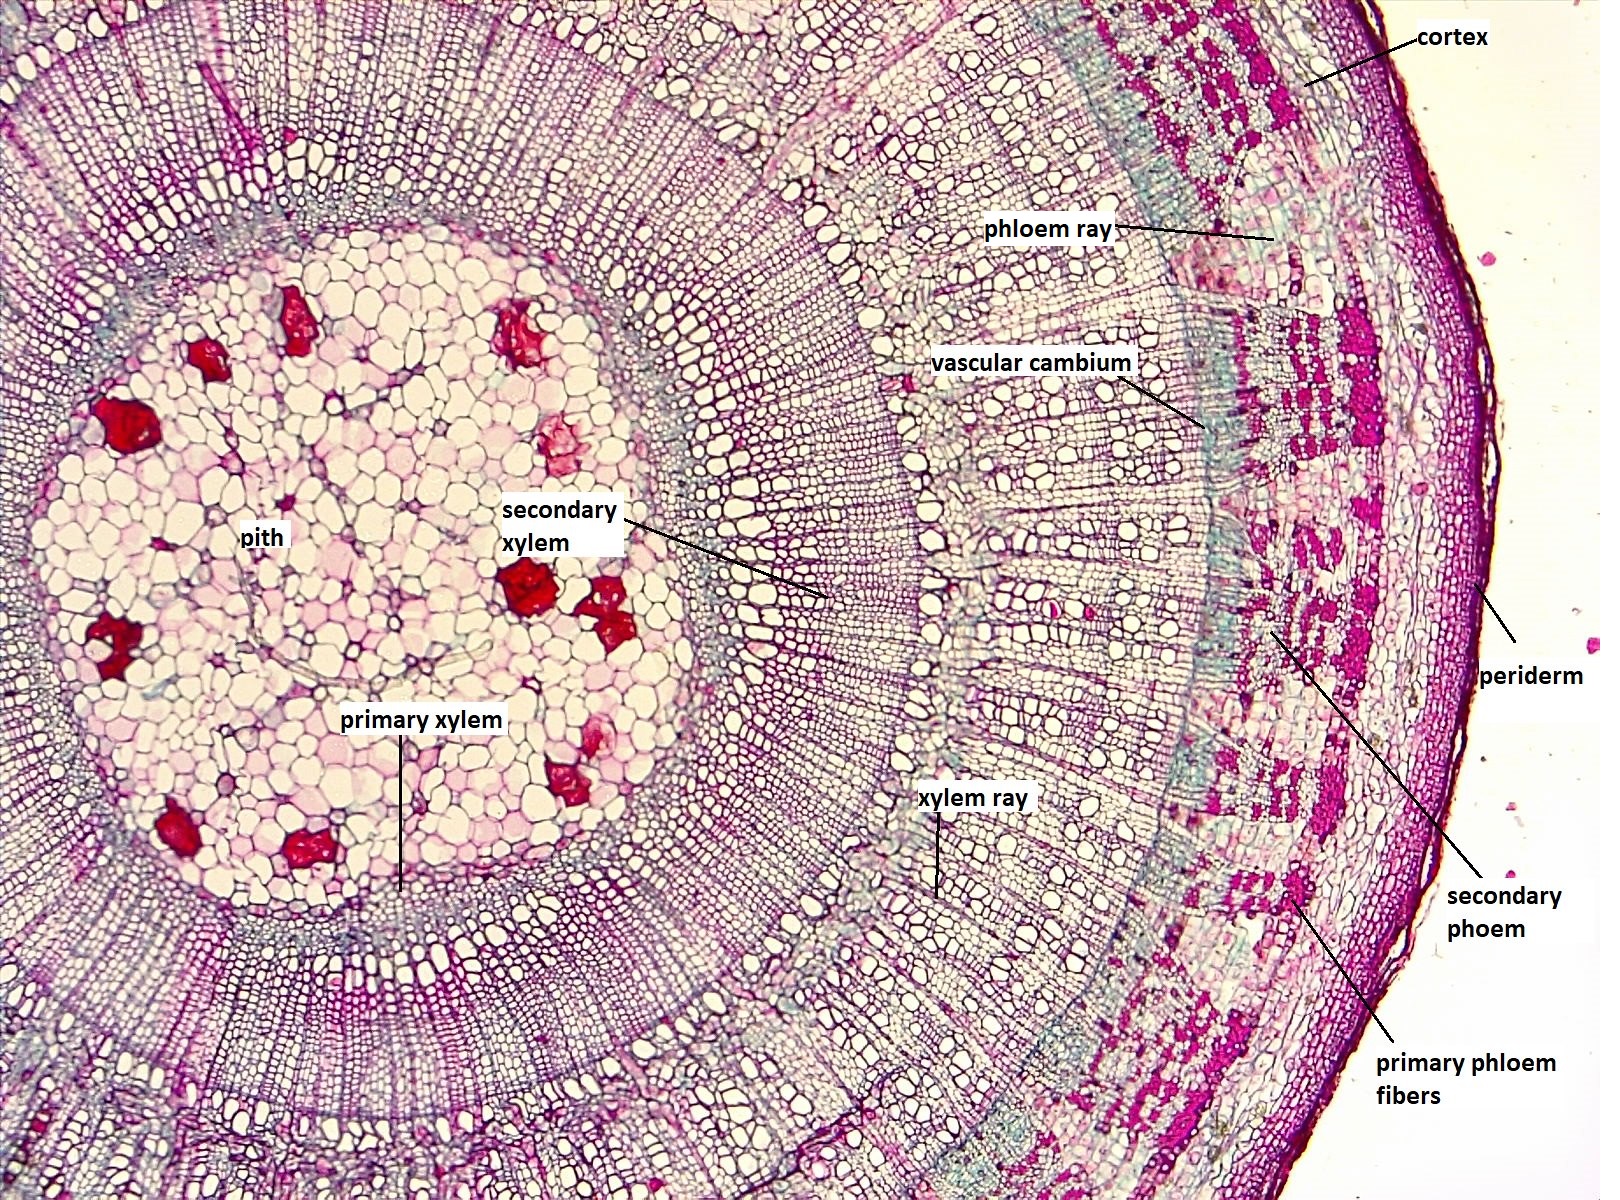 Woody stem cross section shows many cell layers in concentric circles.